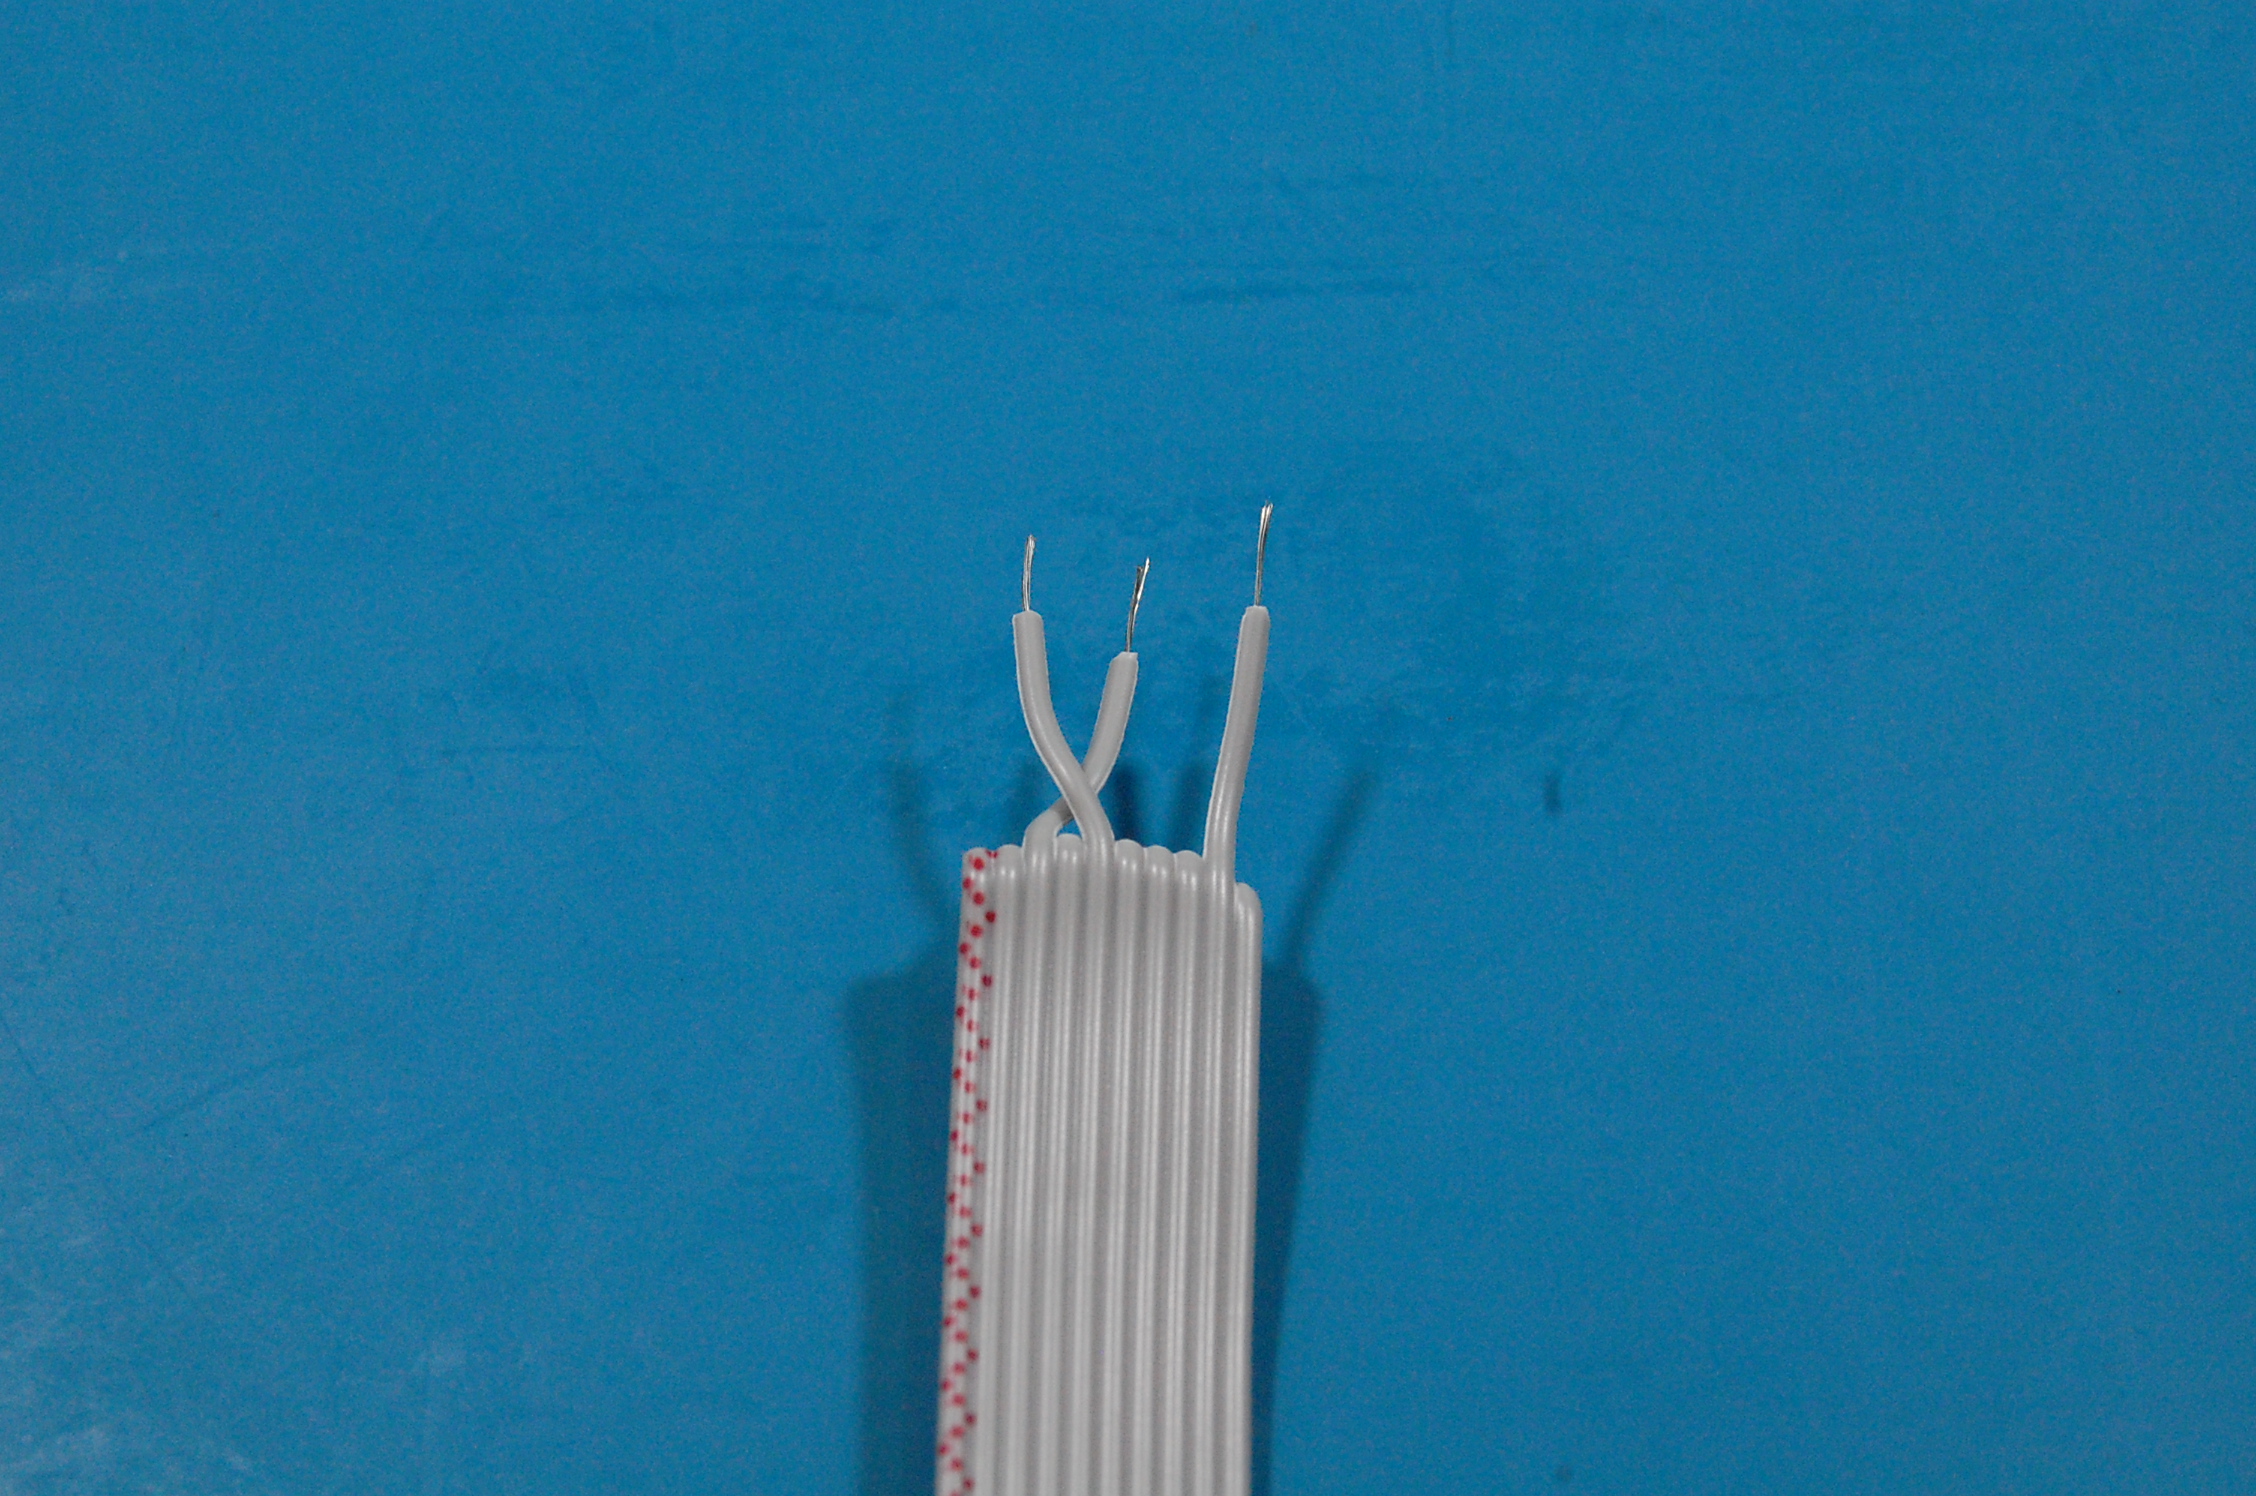 Stripped ribbon cable ways - they are ordered as required to correctly fit in the DB9 connector